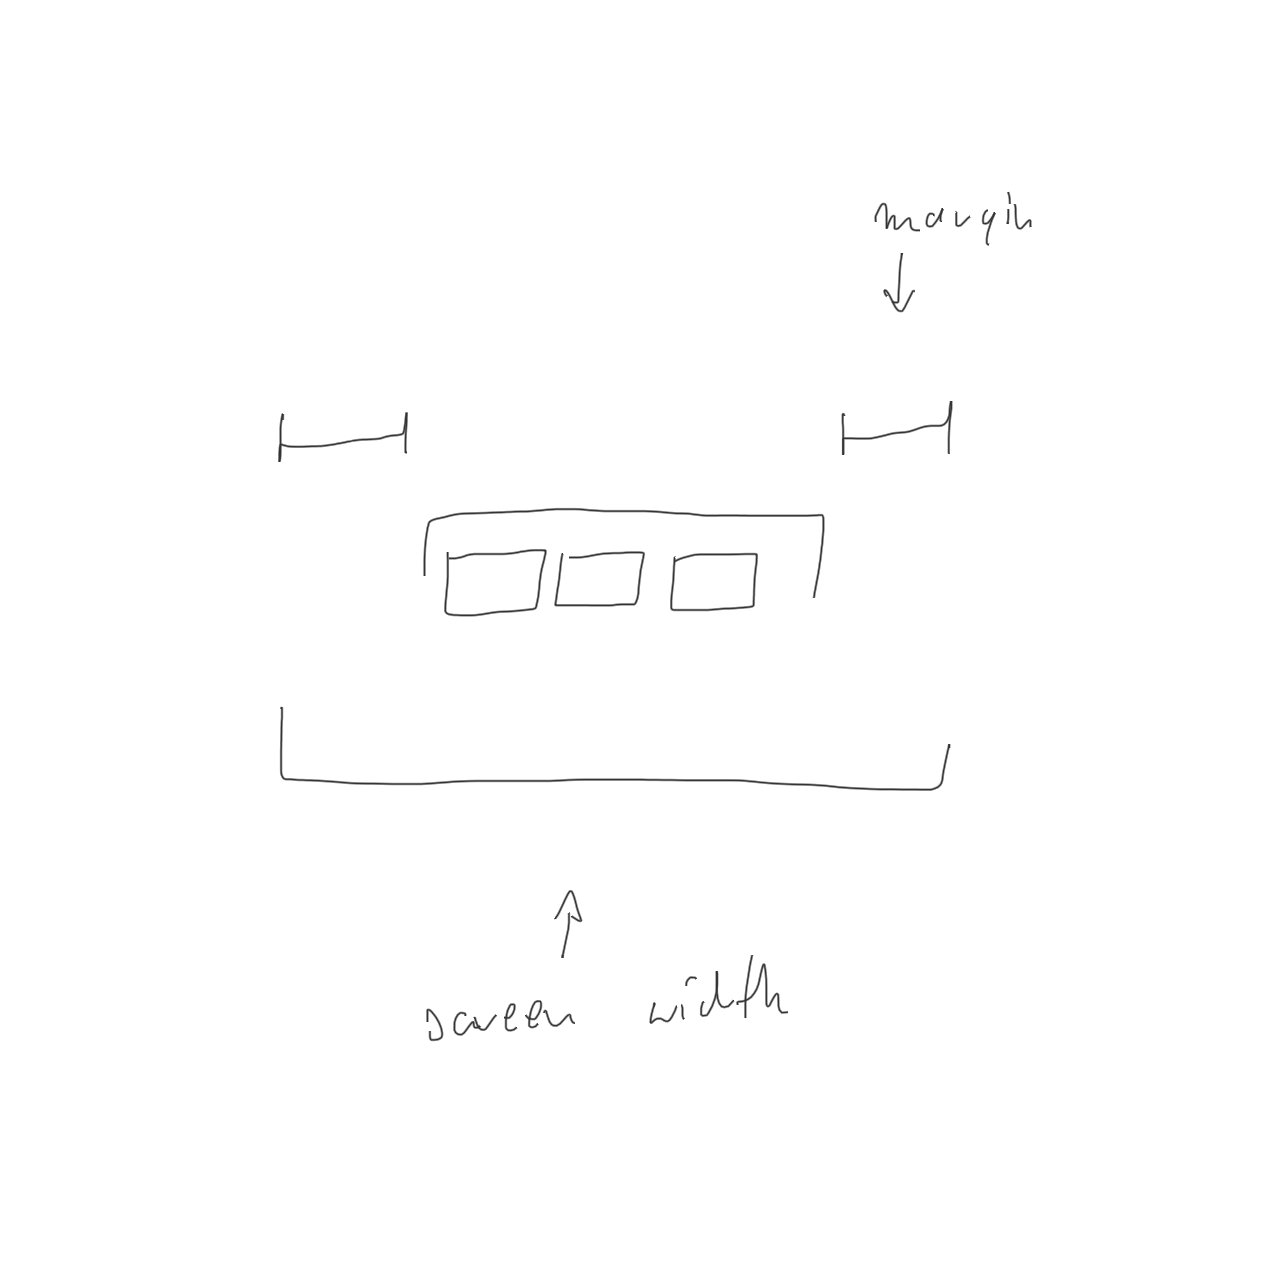 A quick sketch of the basic layout of the interface.